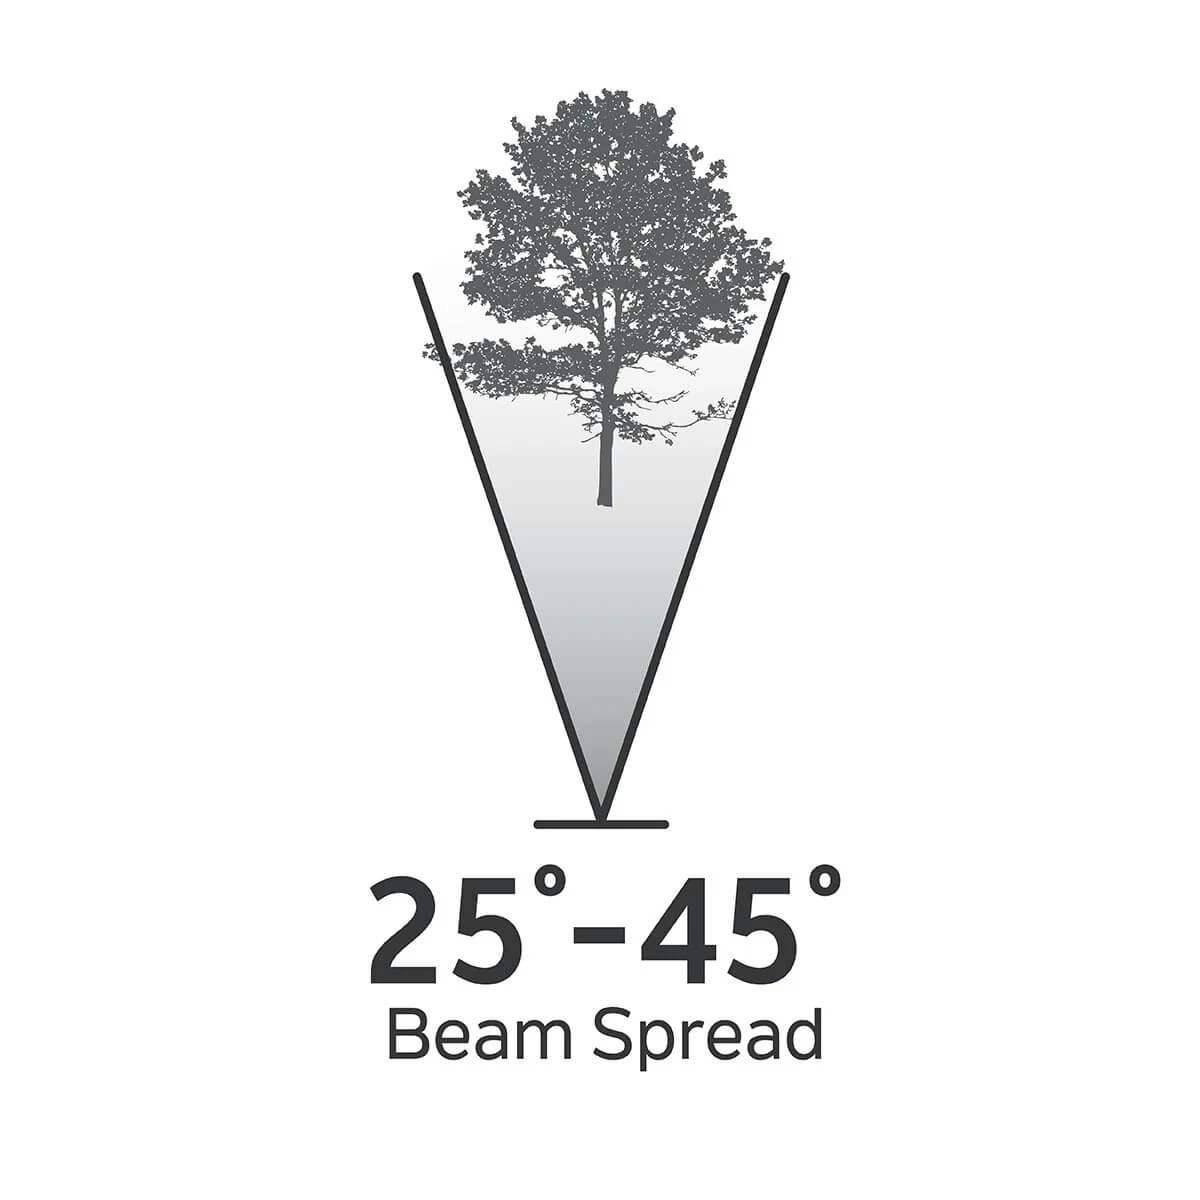 Small to medium tree illustration with 25 to 45 degree beam spread